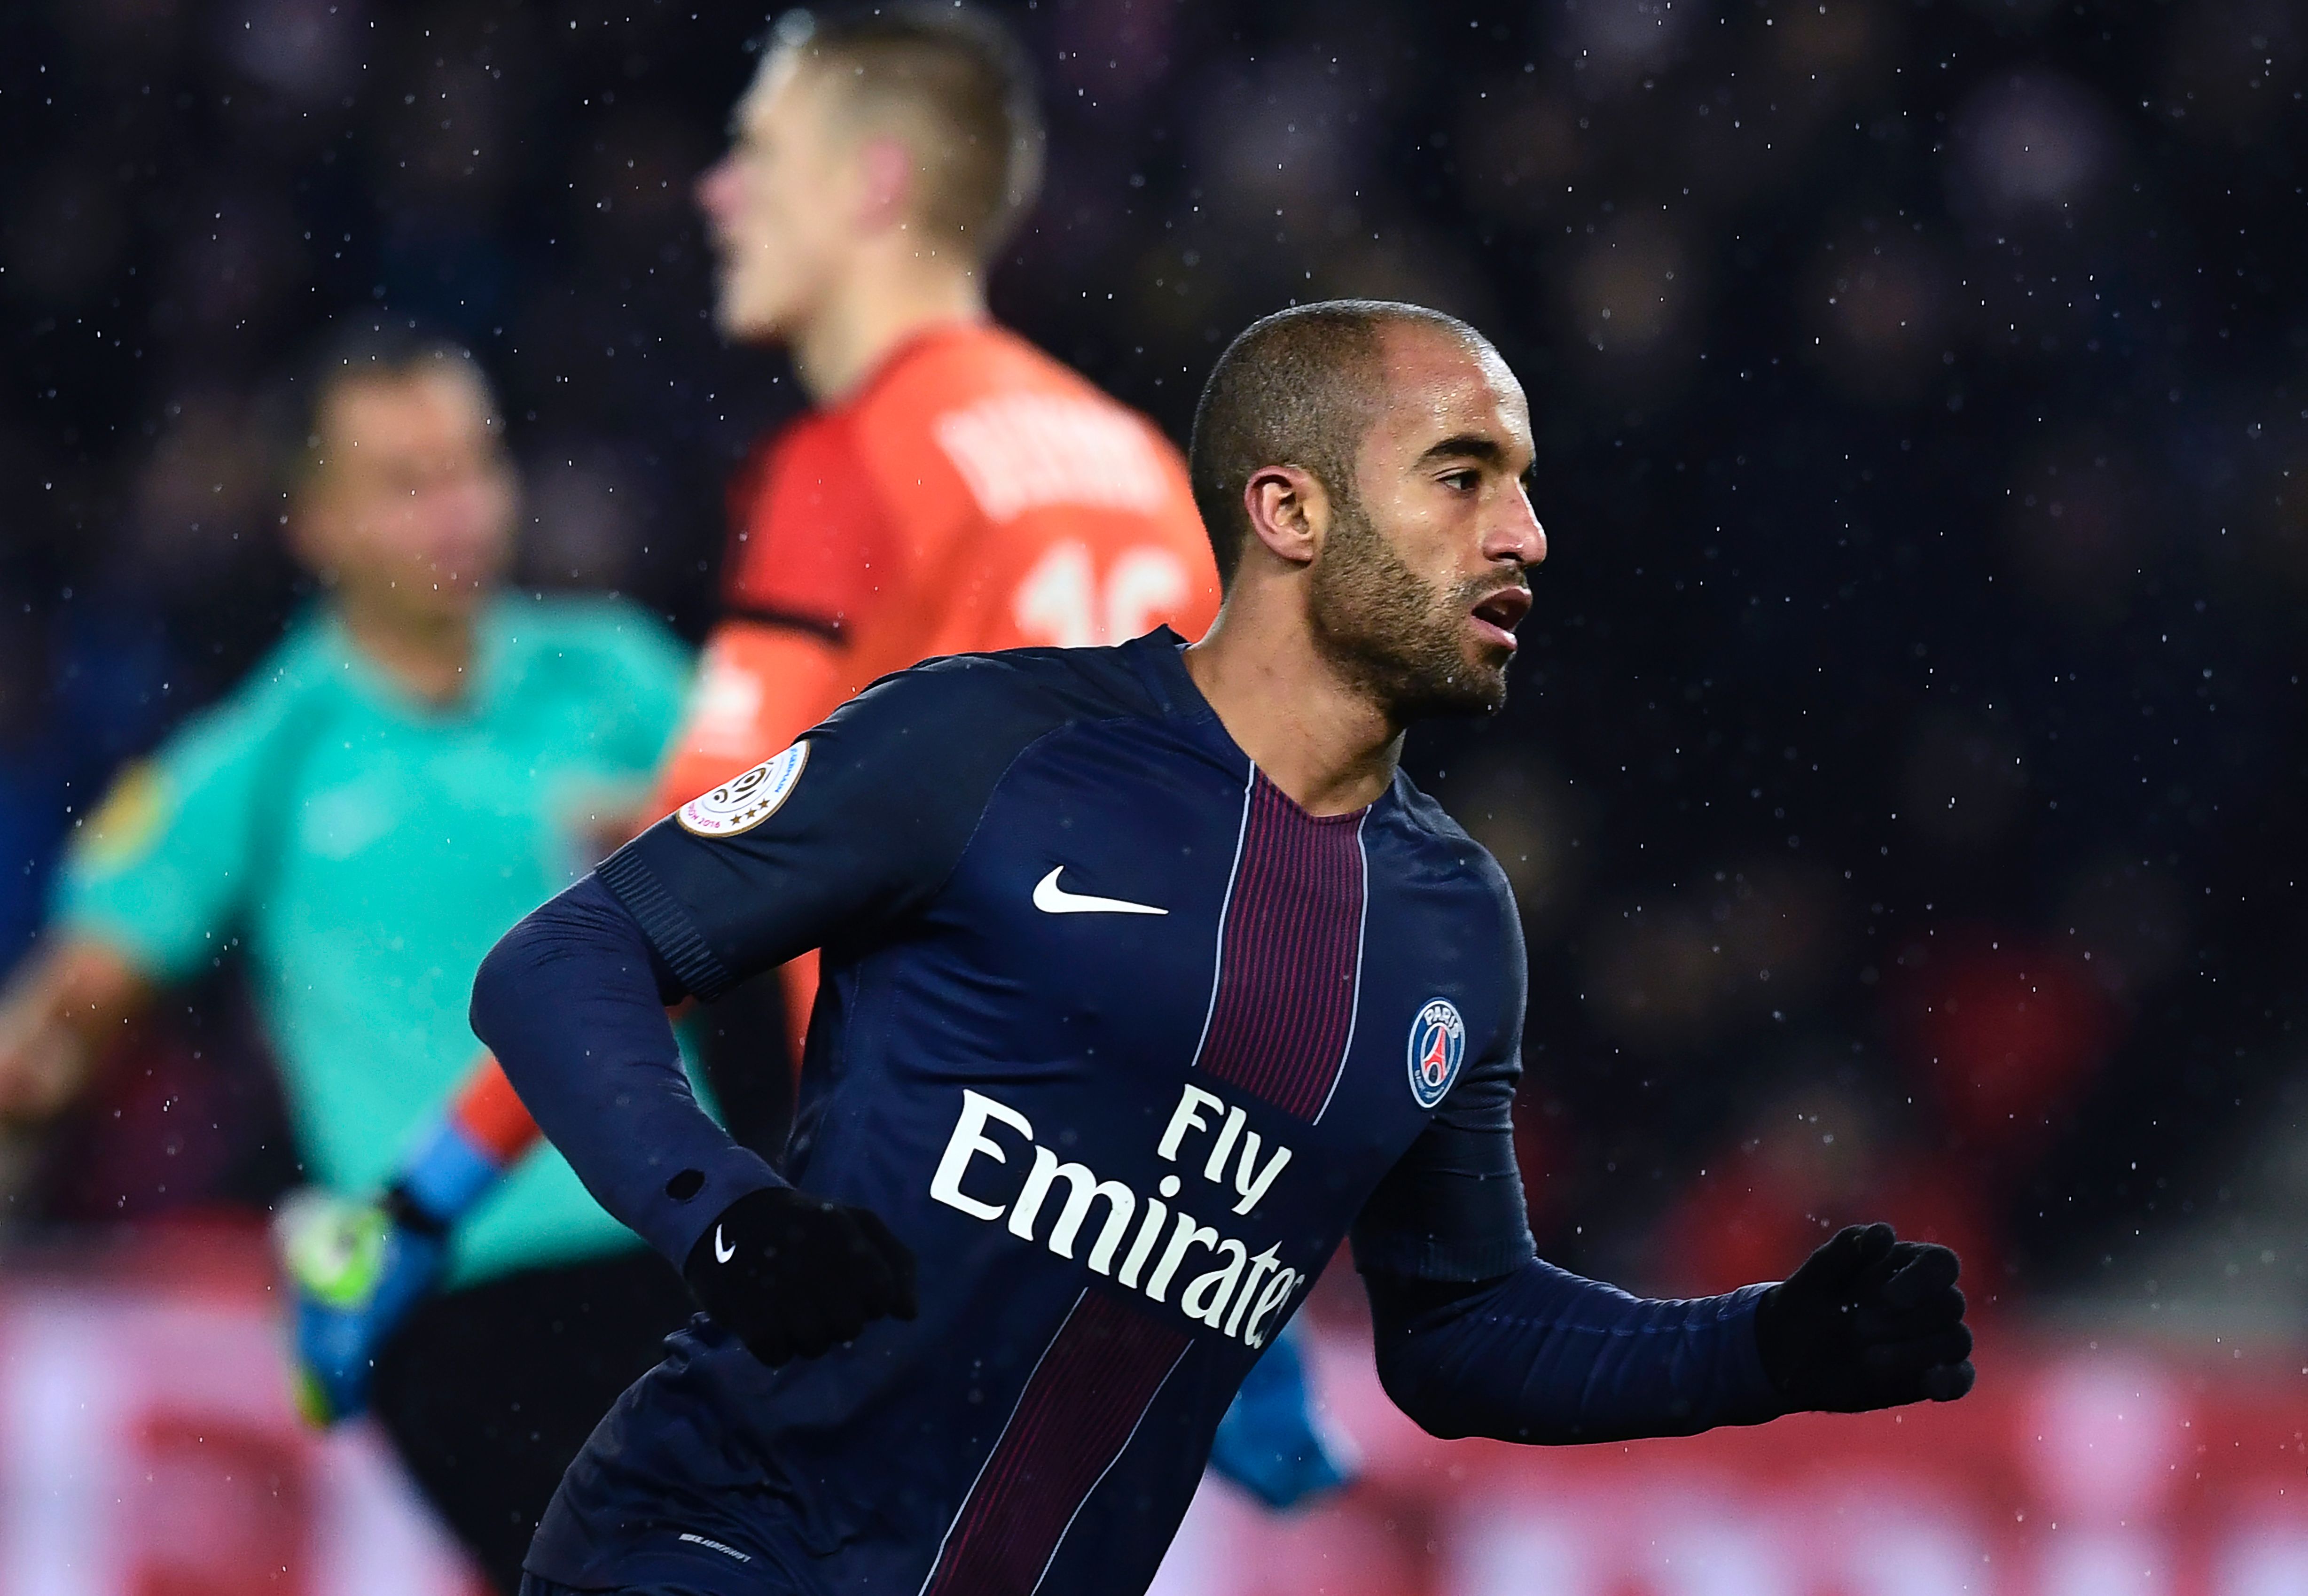 Paris Saint-Germain's Brazilian midfielder Lucas Moura reacts after scoring  during the French L1 football match between Paris Saint-Germain (PSG) and Lorient (FCL) at the Parc des Princes stadium in Paris, on December 21, 2016. / AFP / MIGUEL MEDINA        (Photo credit should read MIGUEL MEDINA/AFP/Getty Images)